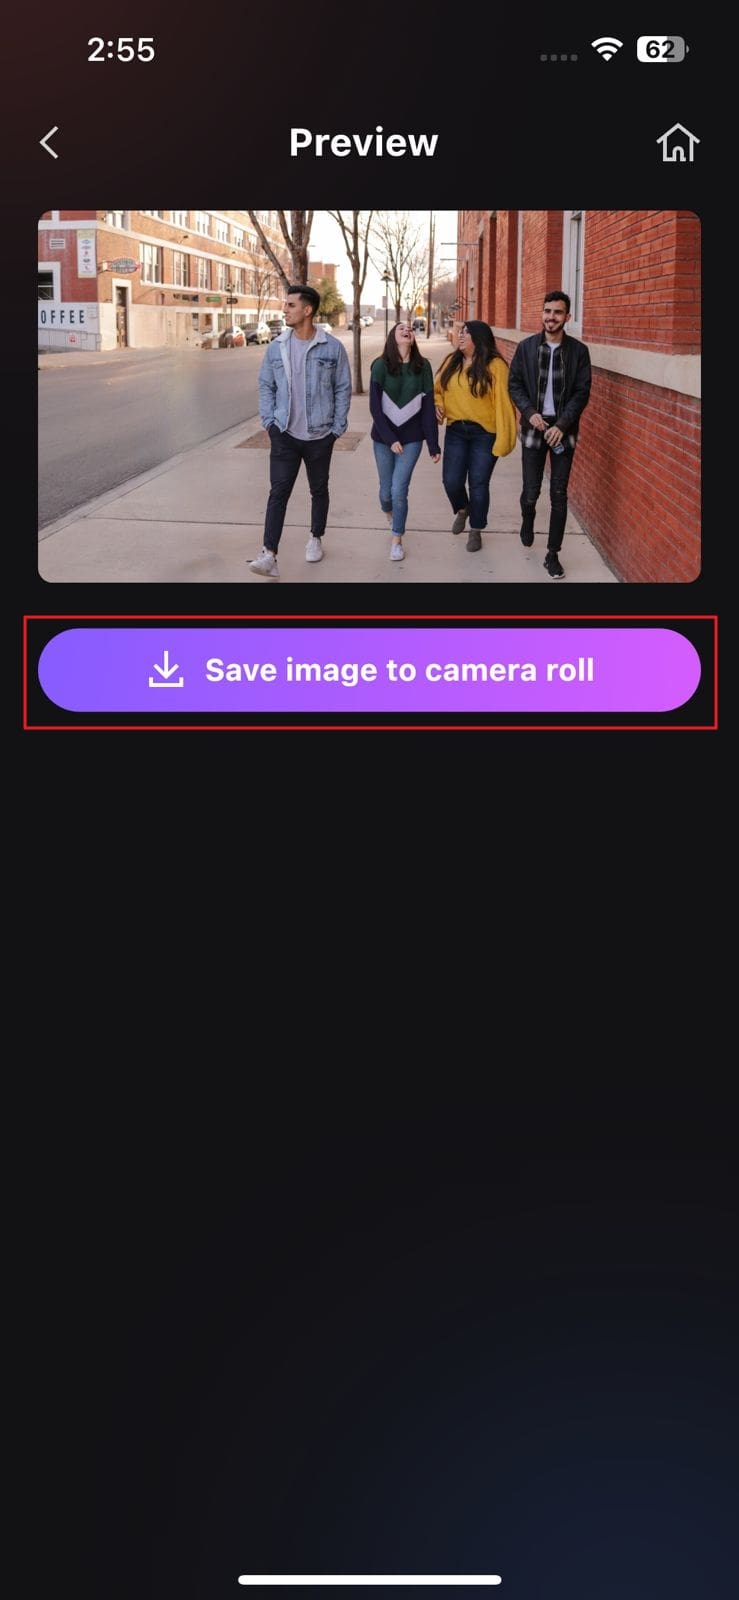 tap on save image to camera roll